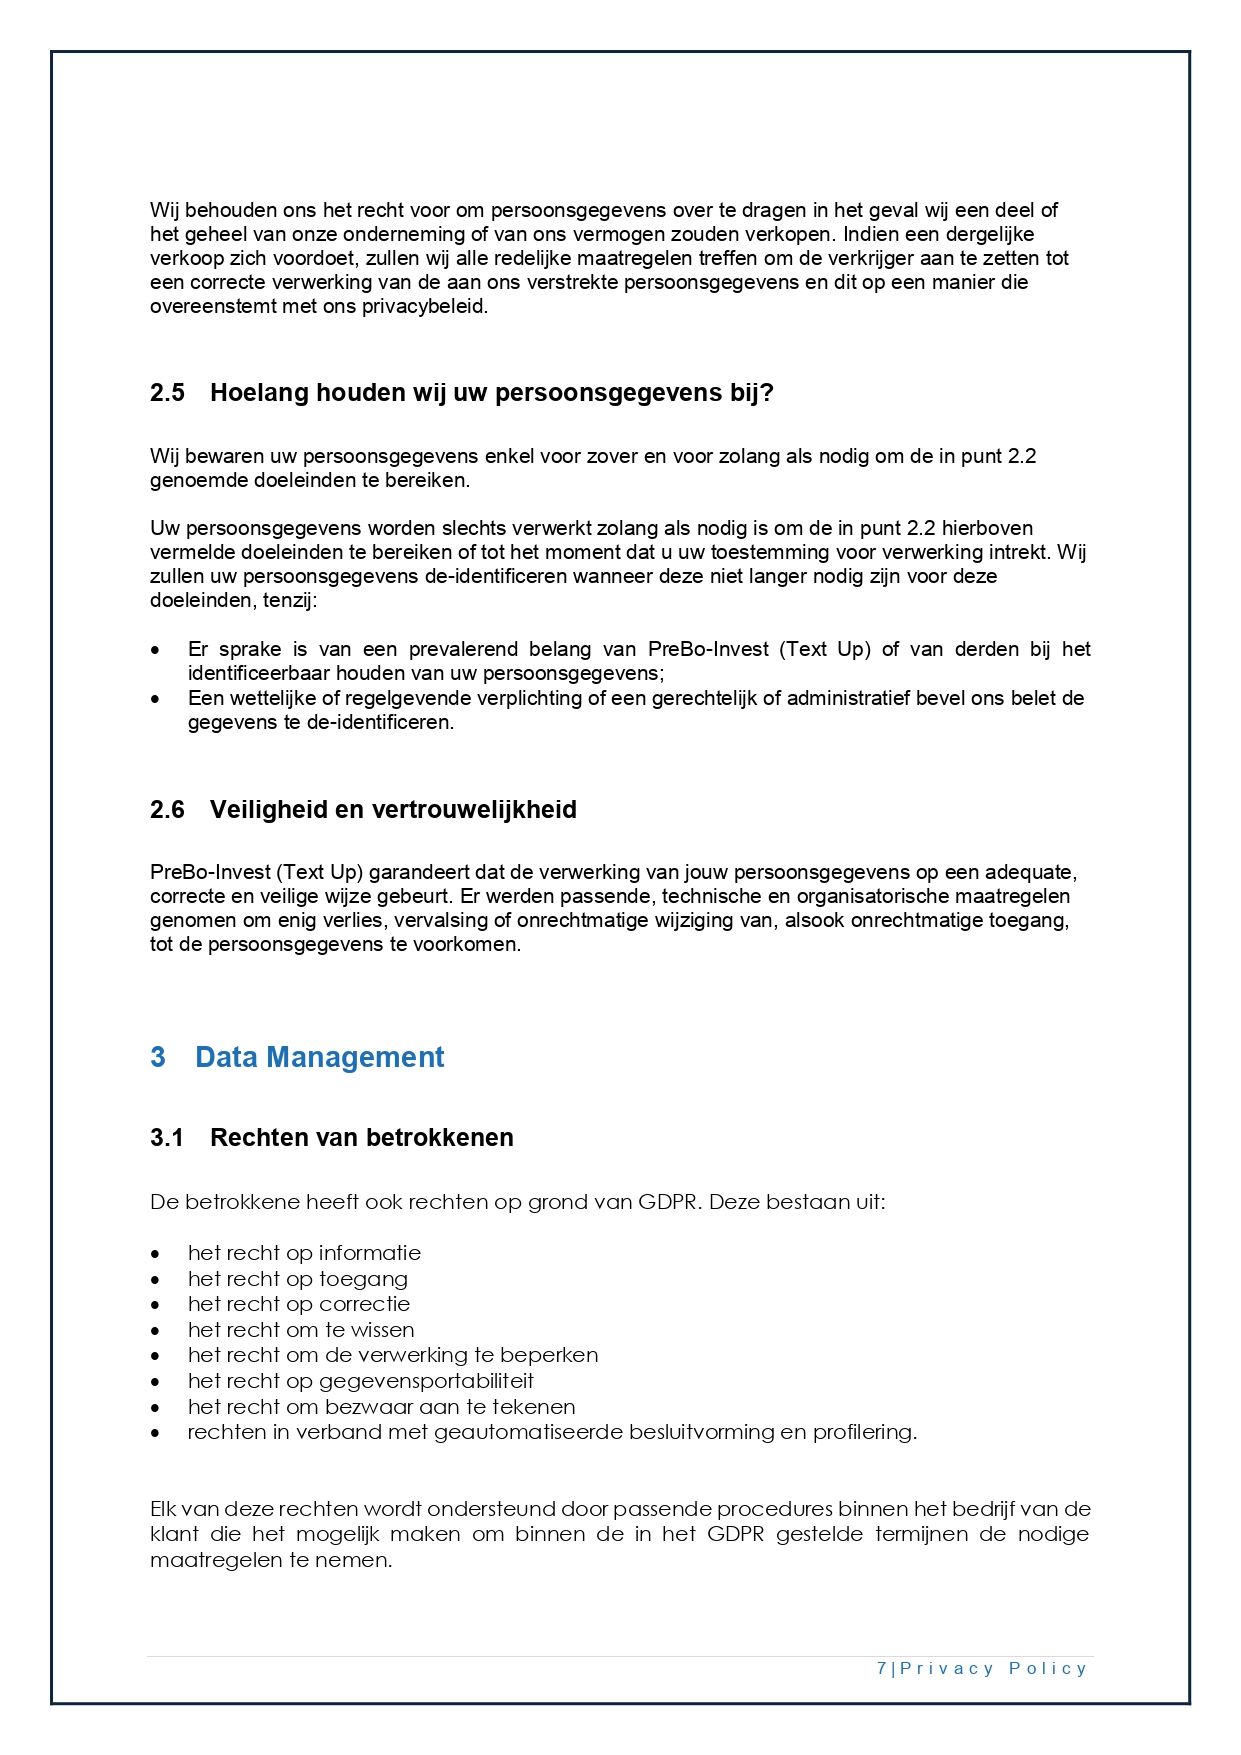 02 Privacy Policy textup.be NL V1.0 page 0007